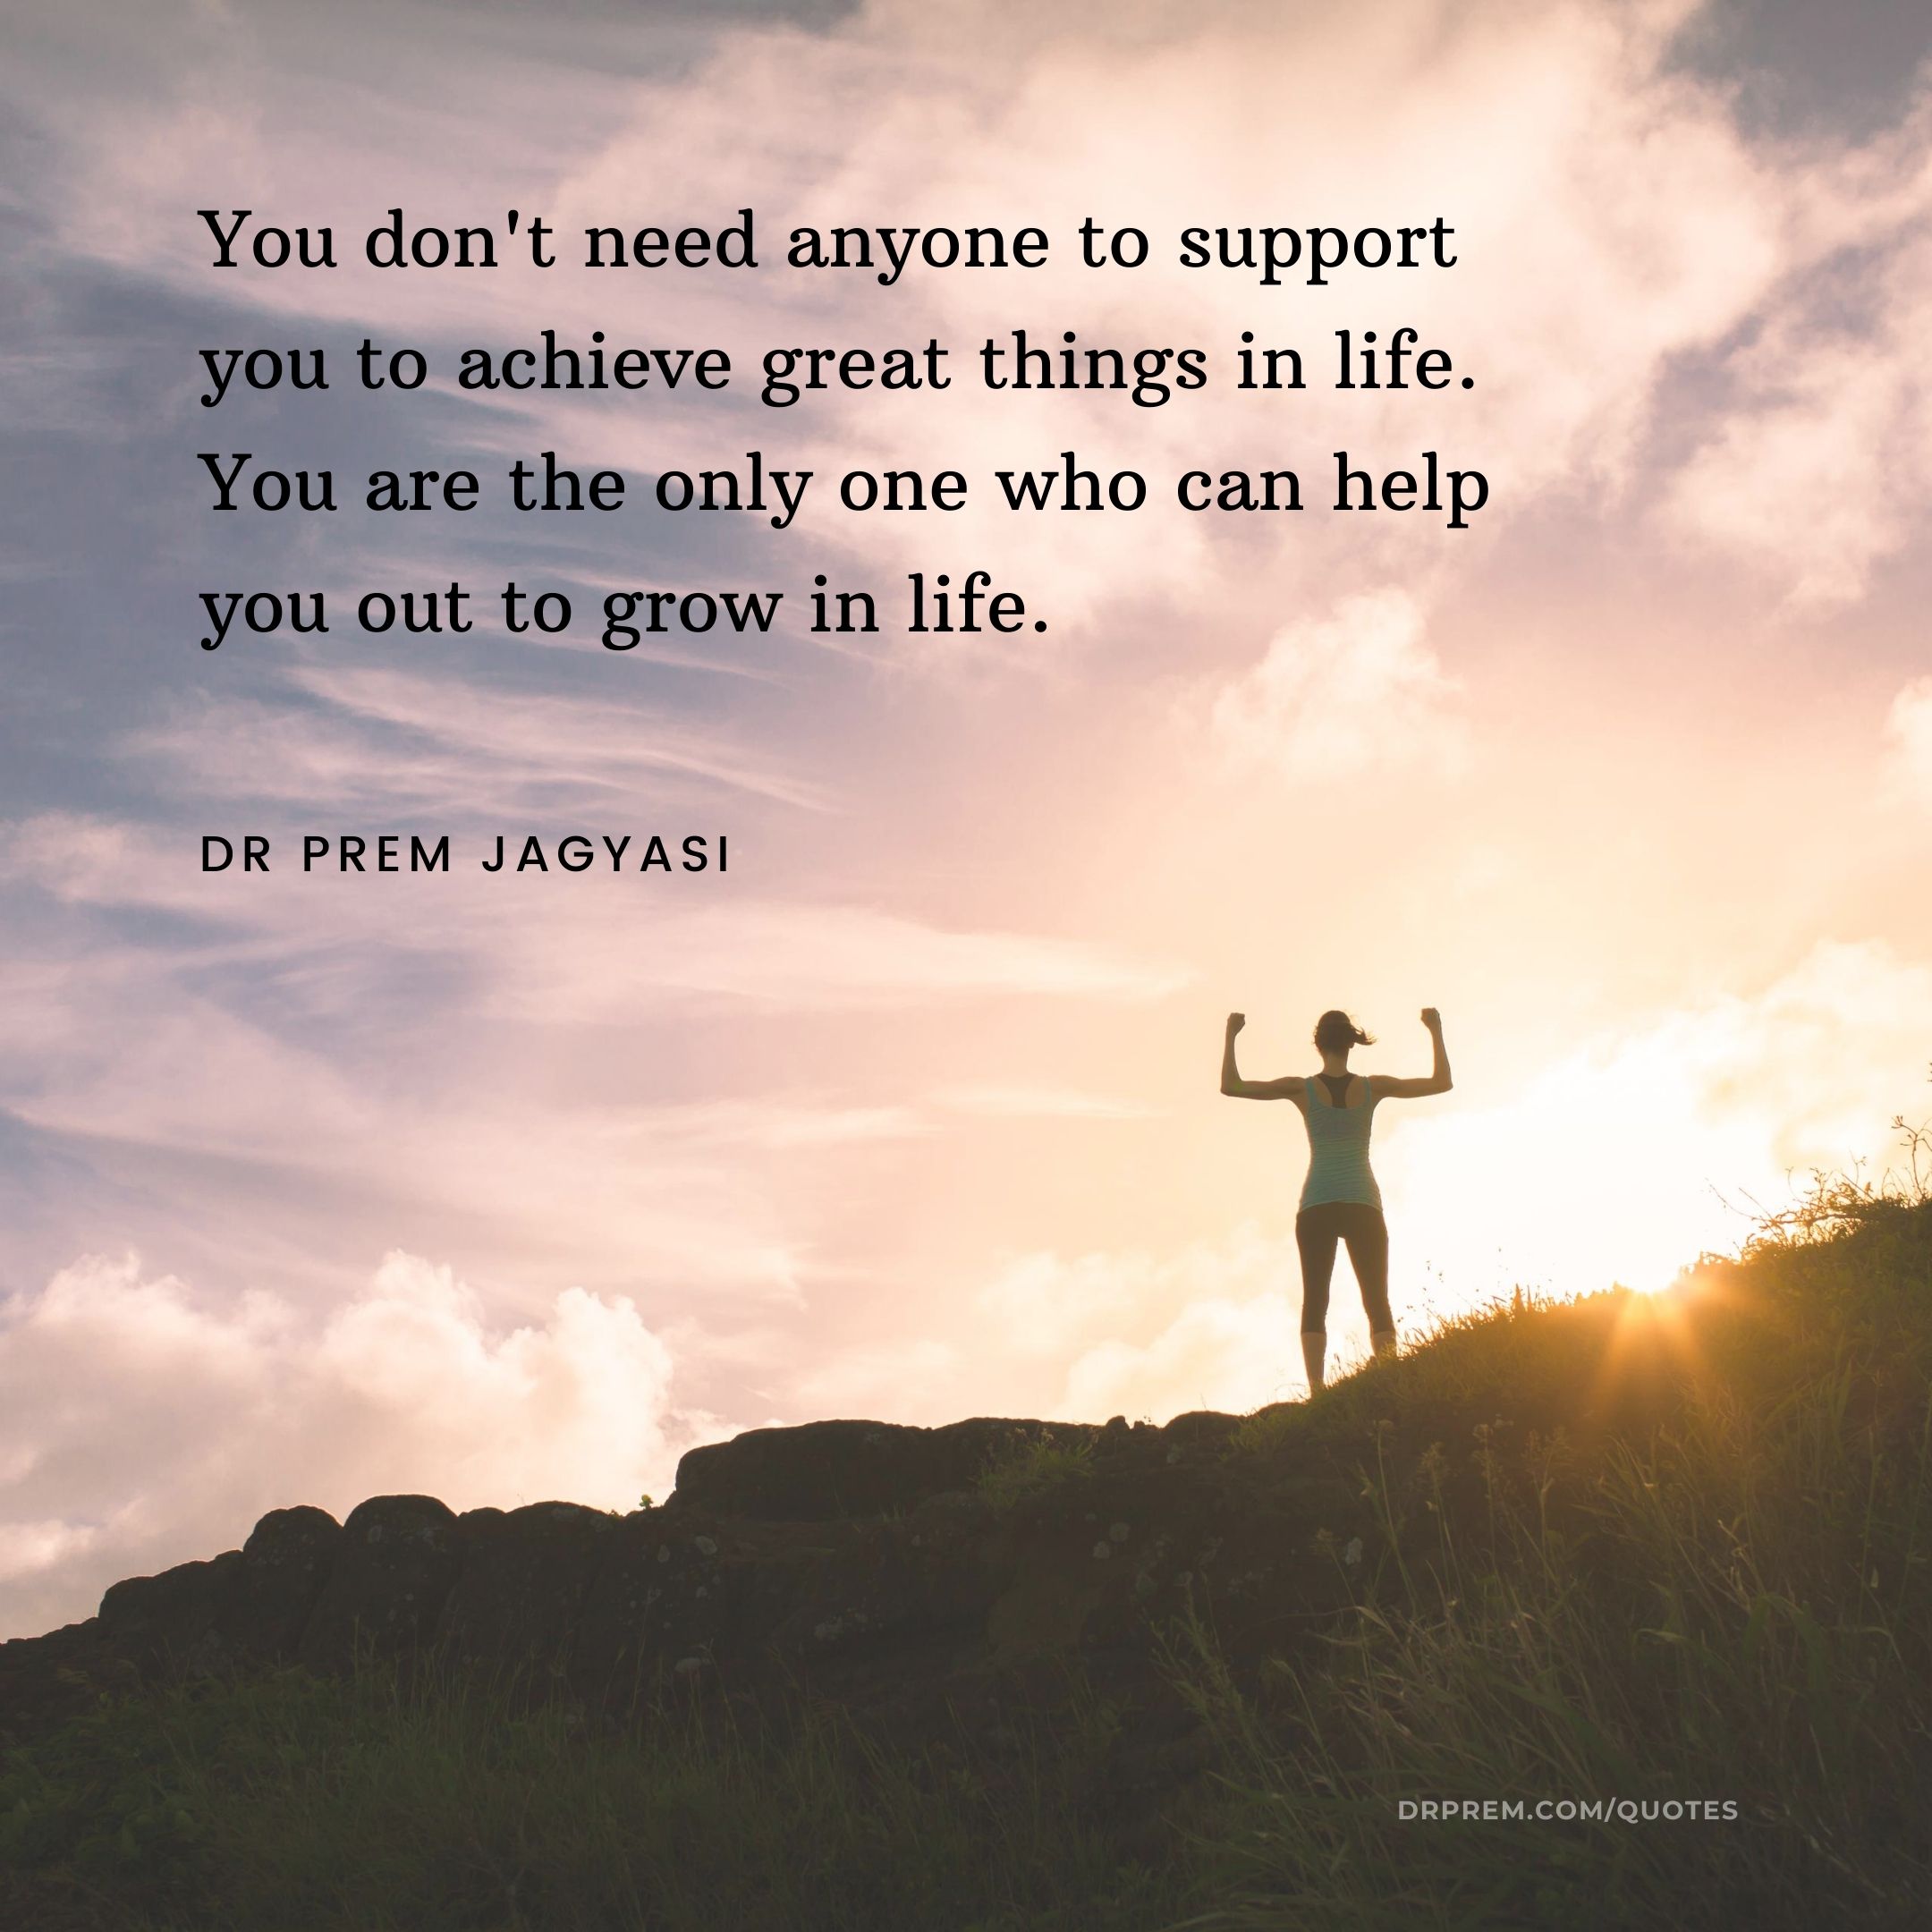 You don't need anyone to support you to achieve great things in life- Dr Prem Jagyasi Quotes